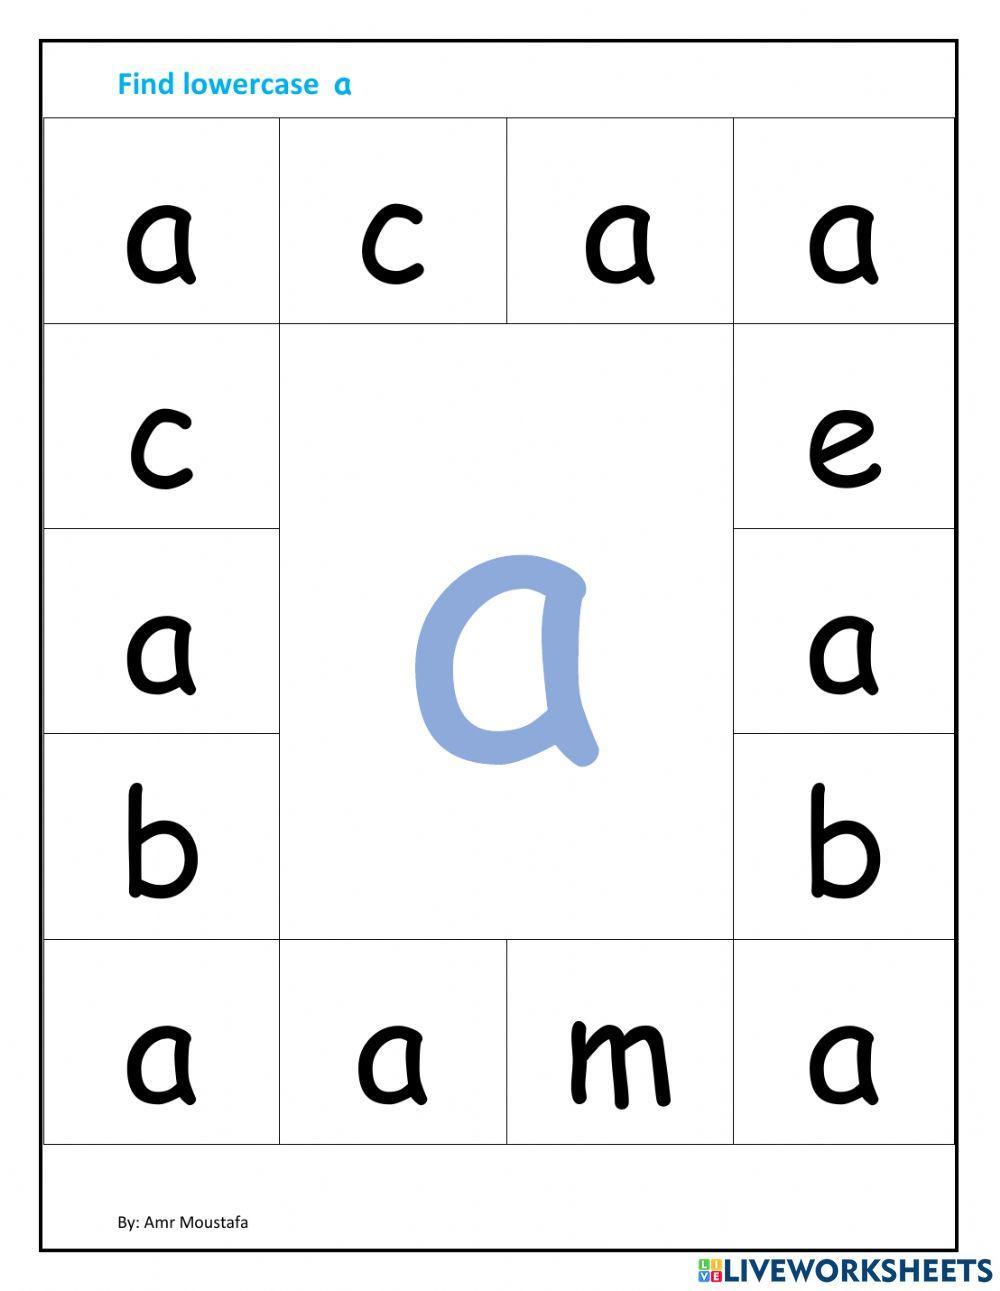 Find lowercase a